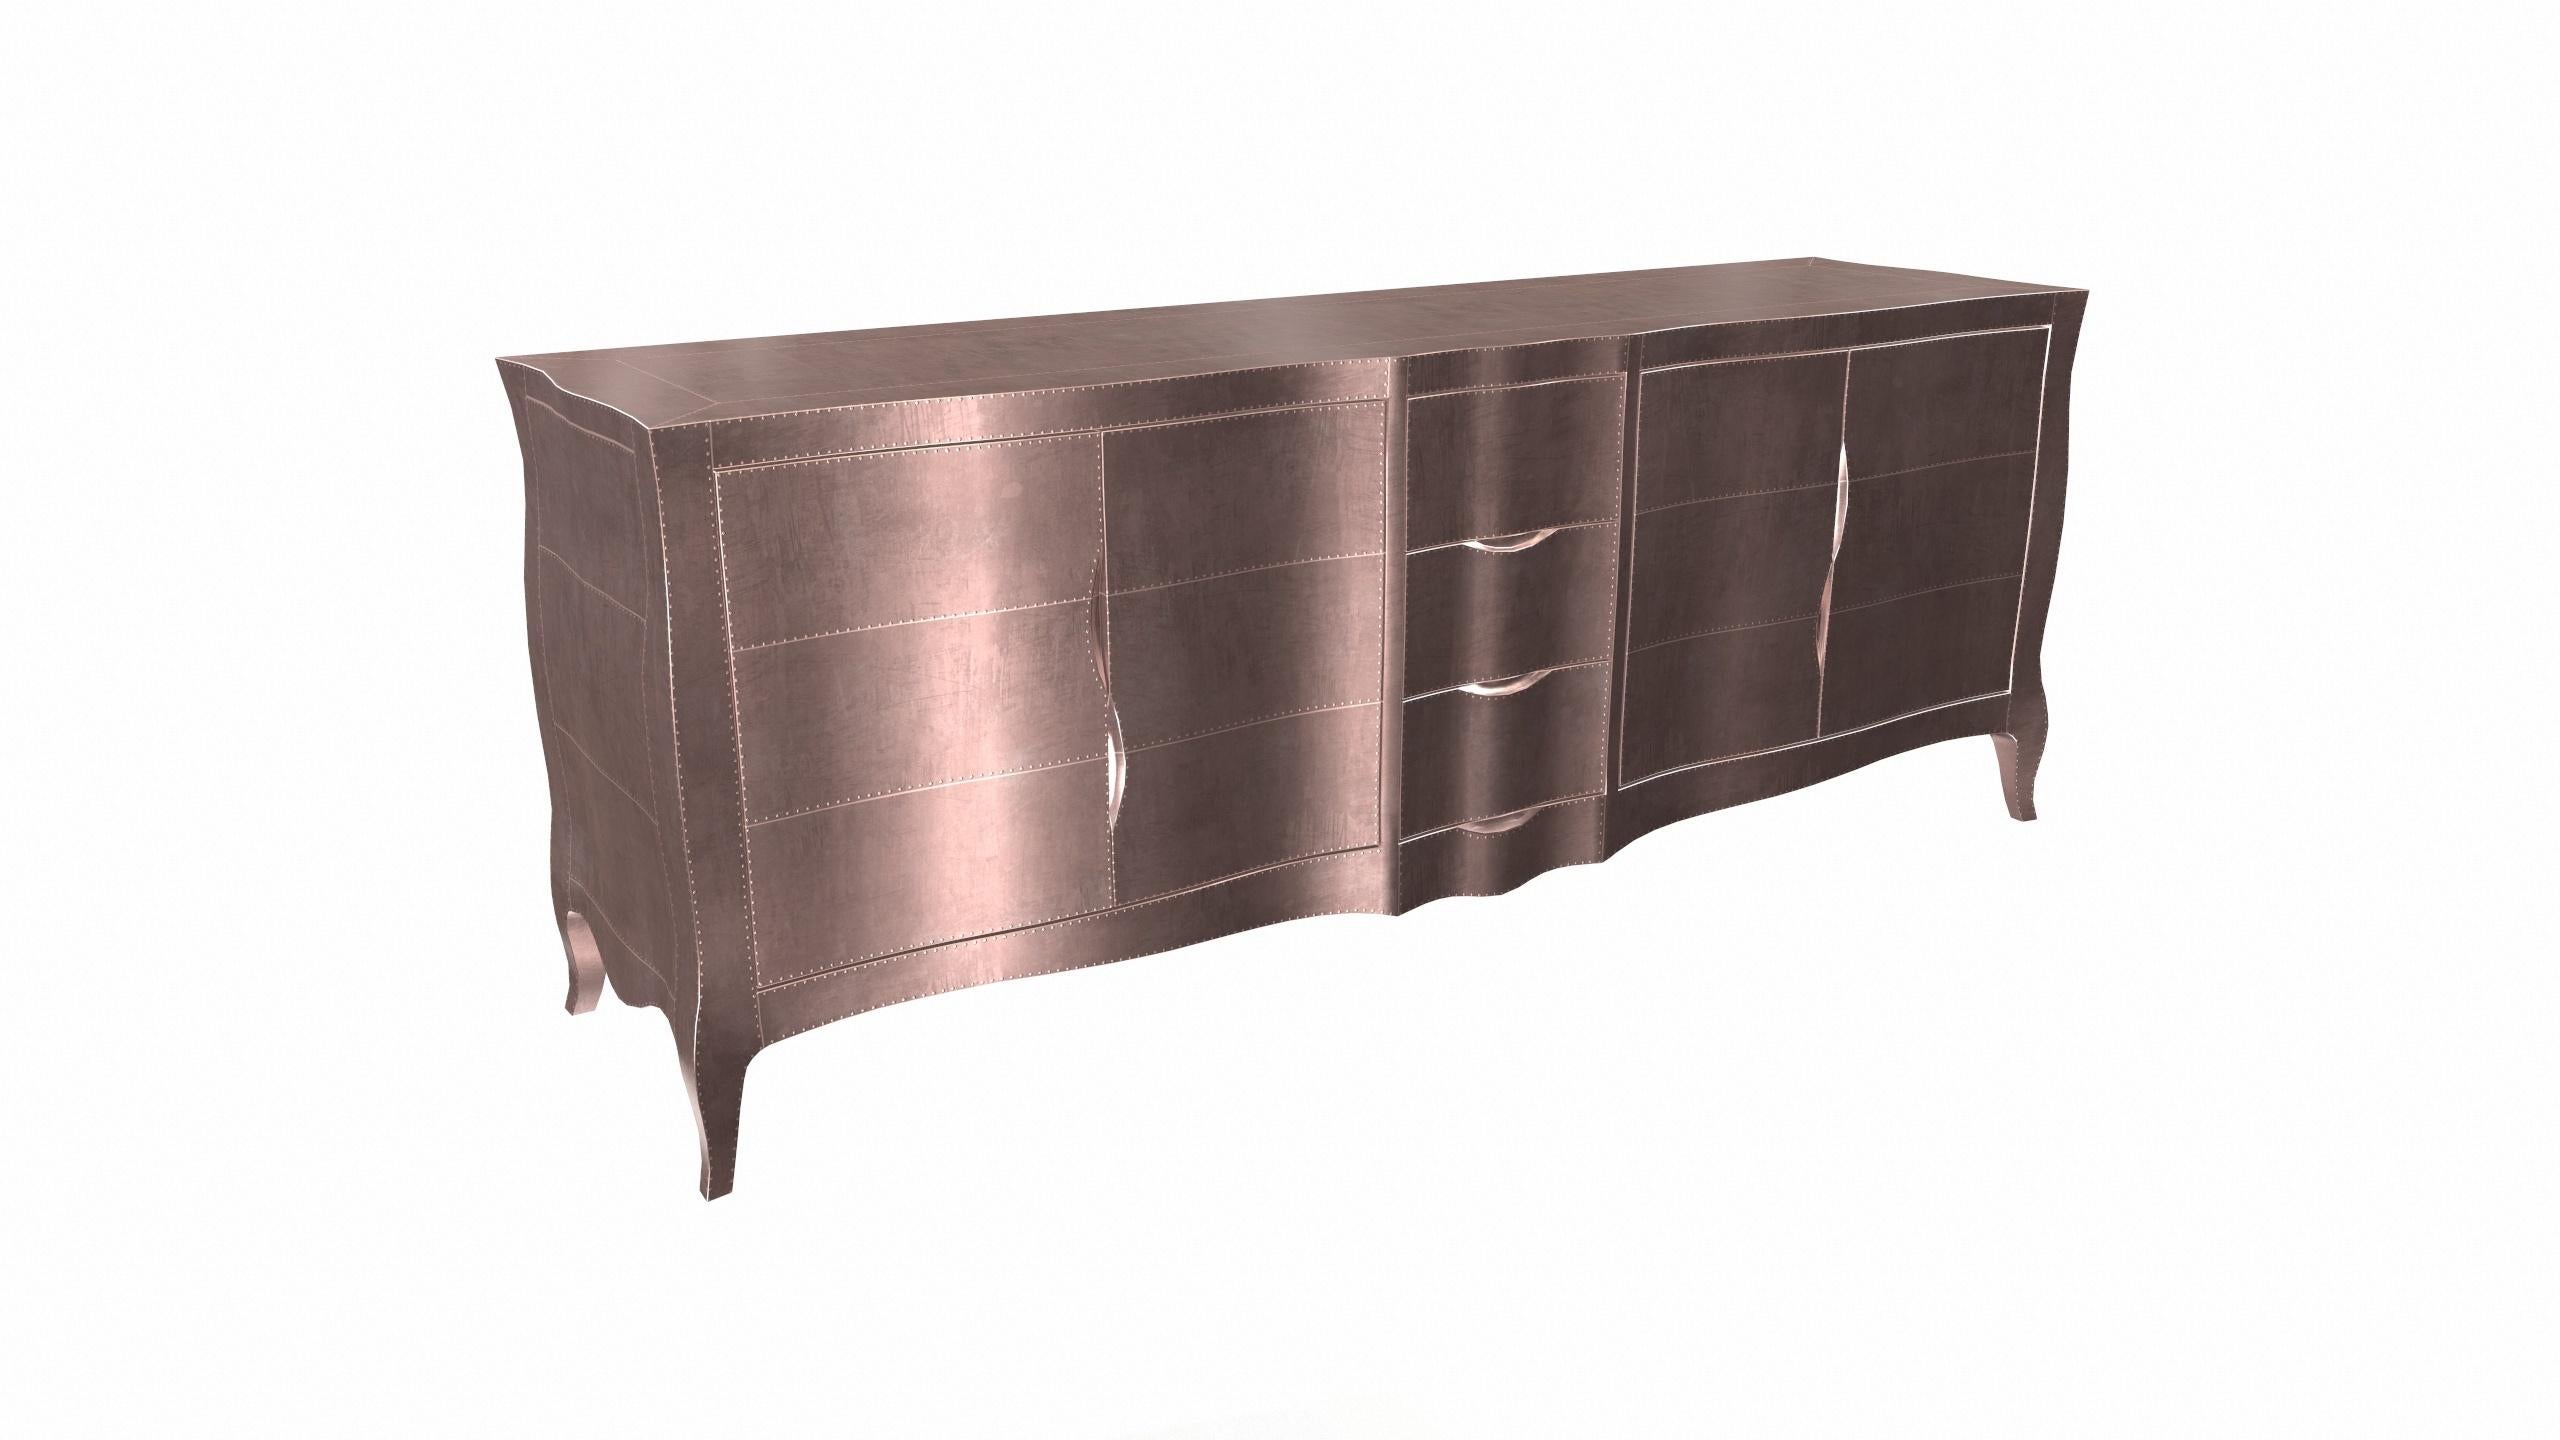 Contemporary Louise Credenza Art Deco Cabinets in Smooth Copper by Paul Mathieu for S Odegard For Sale